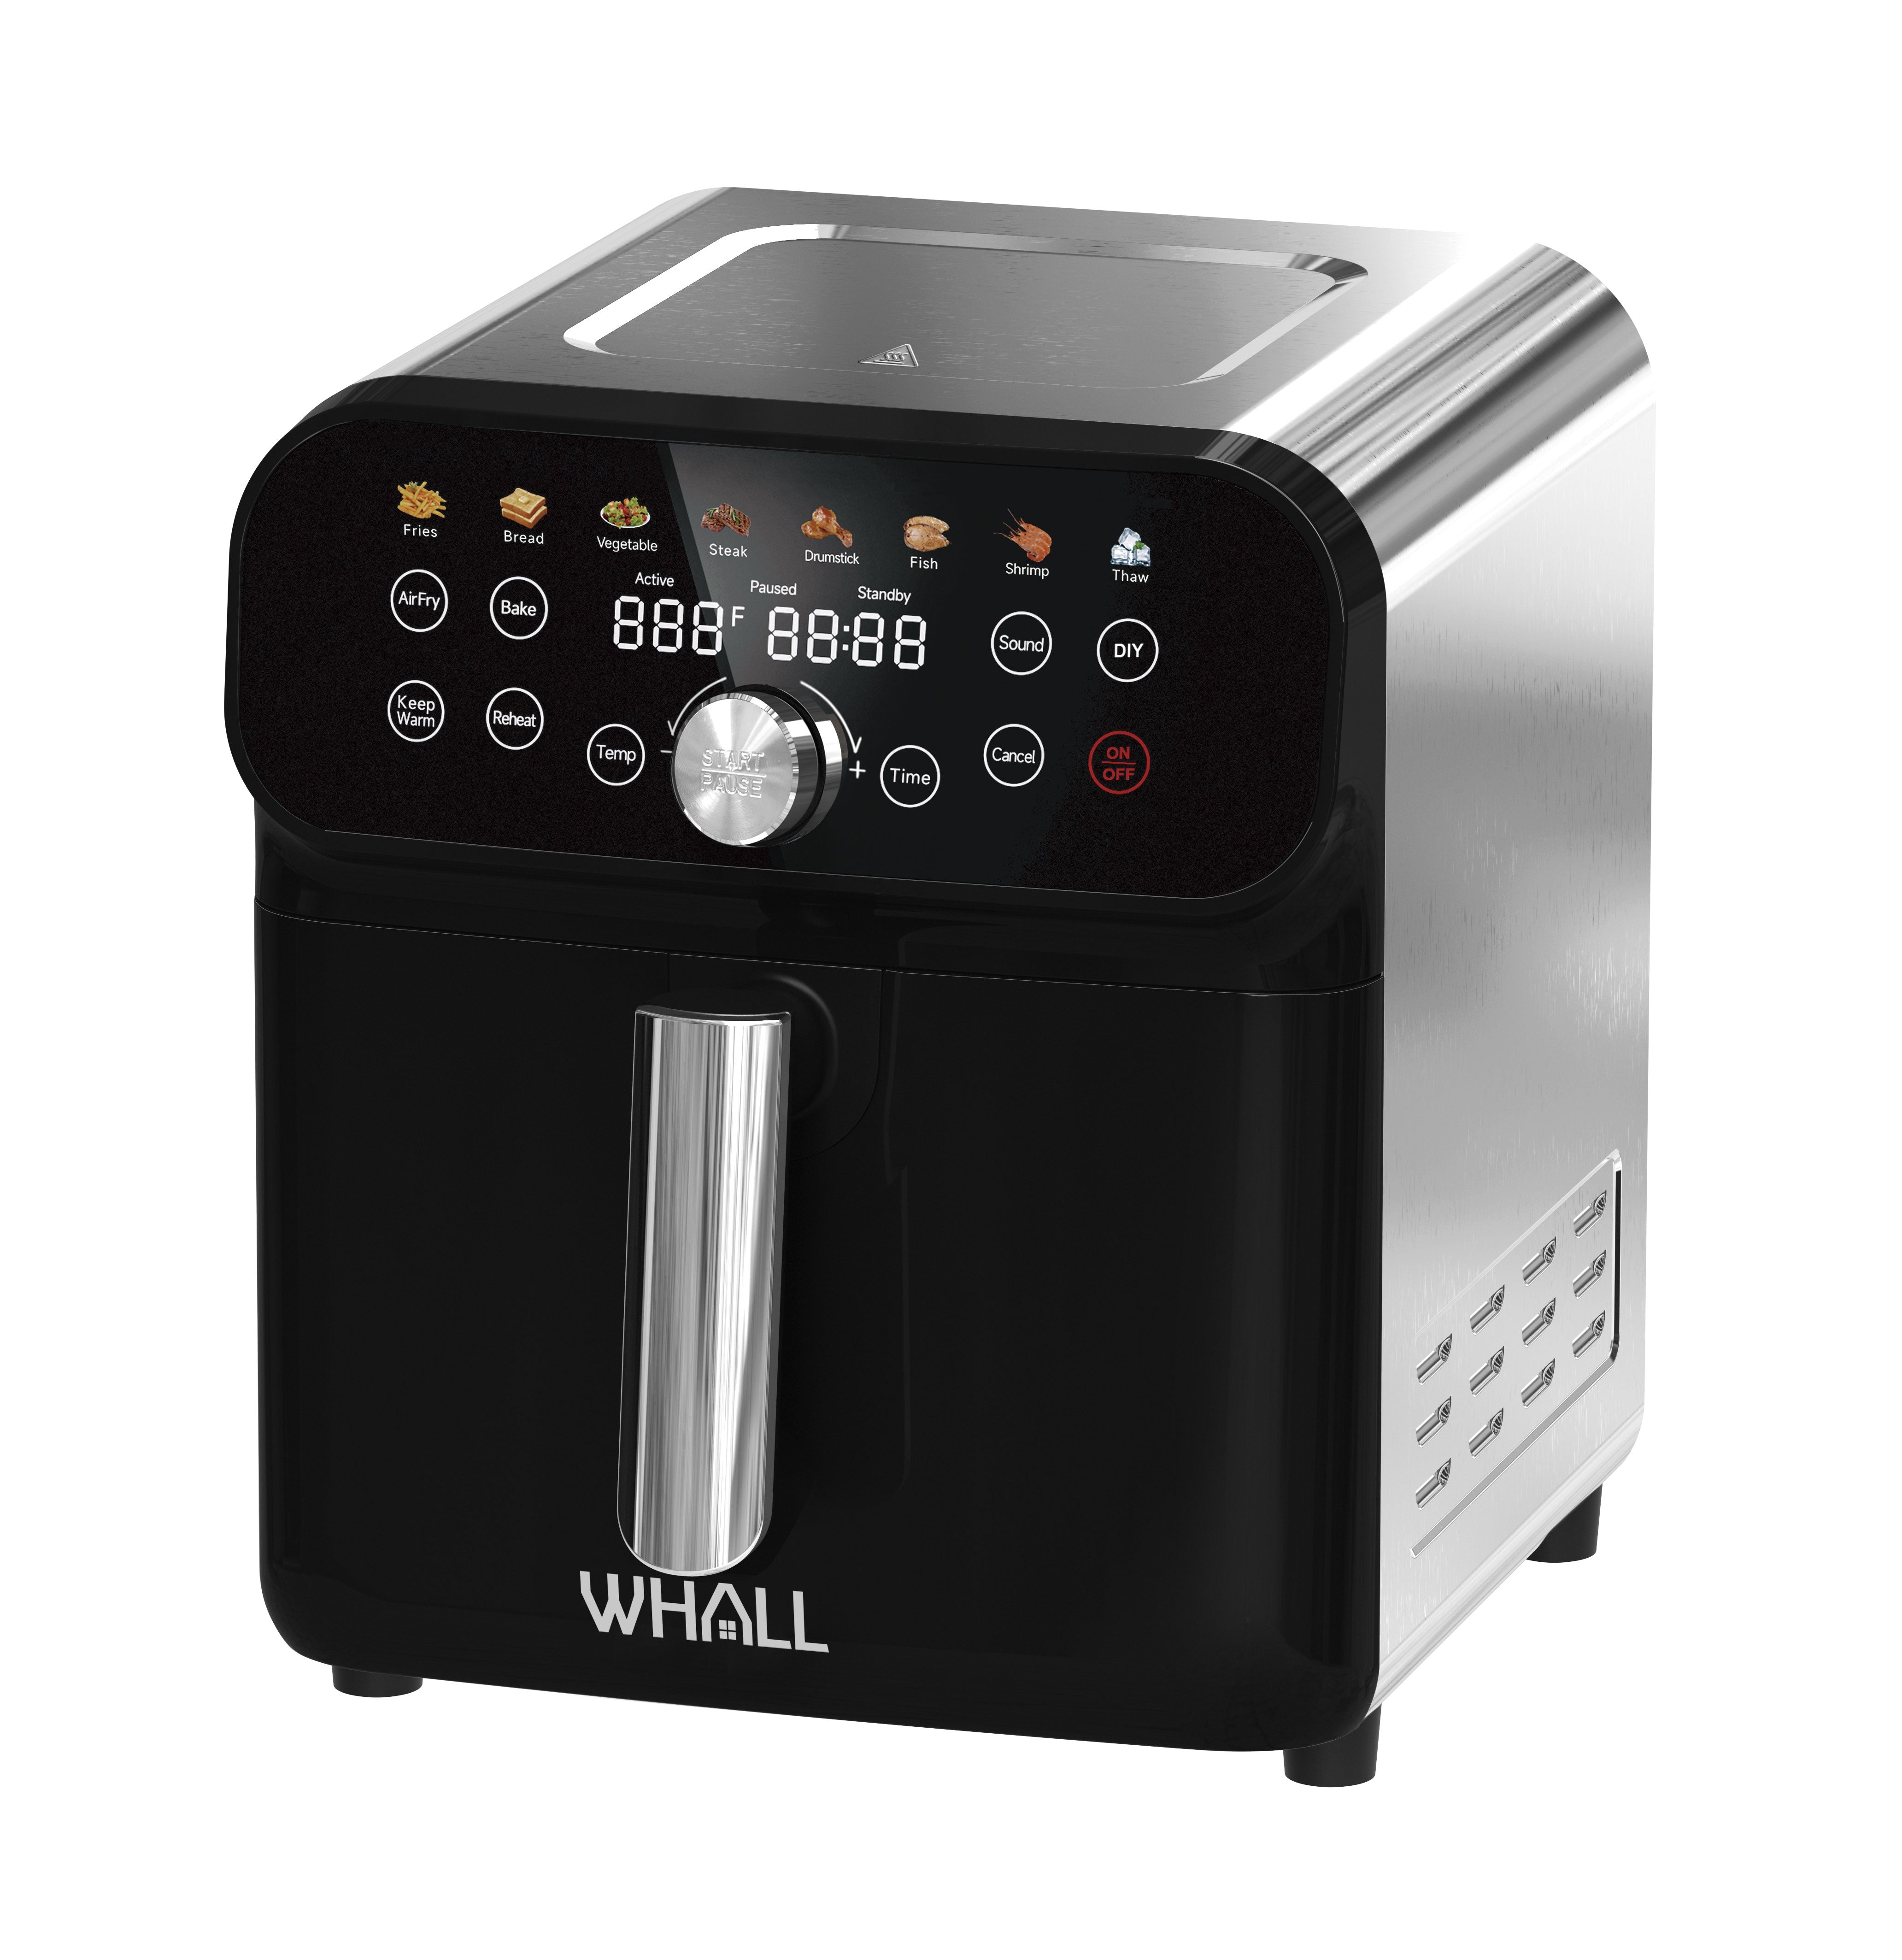 WHALL®AF06D02 Air Fryer, 6.2QT Air Fryer Oven with LED Digital Touchscreen, 12-in-1 Cooking Functions Air fryers, Dishwasher-Safe Basket, Stainless Steel/BS